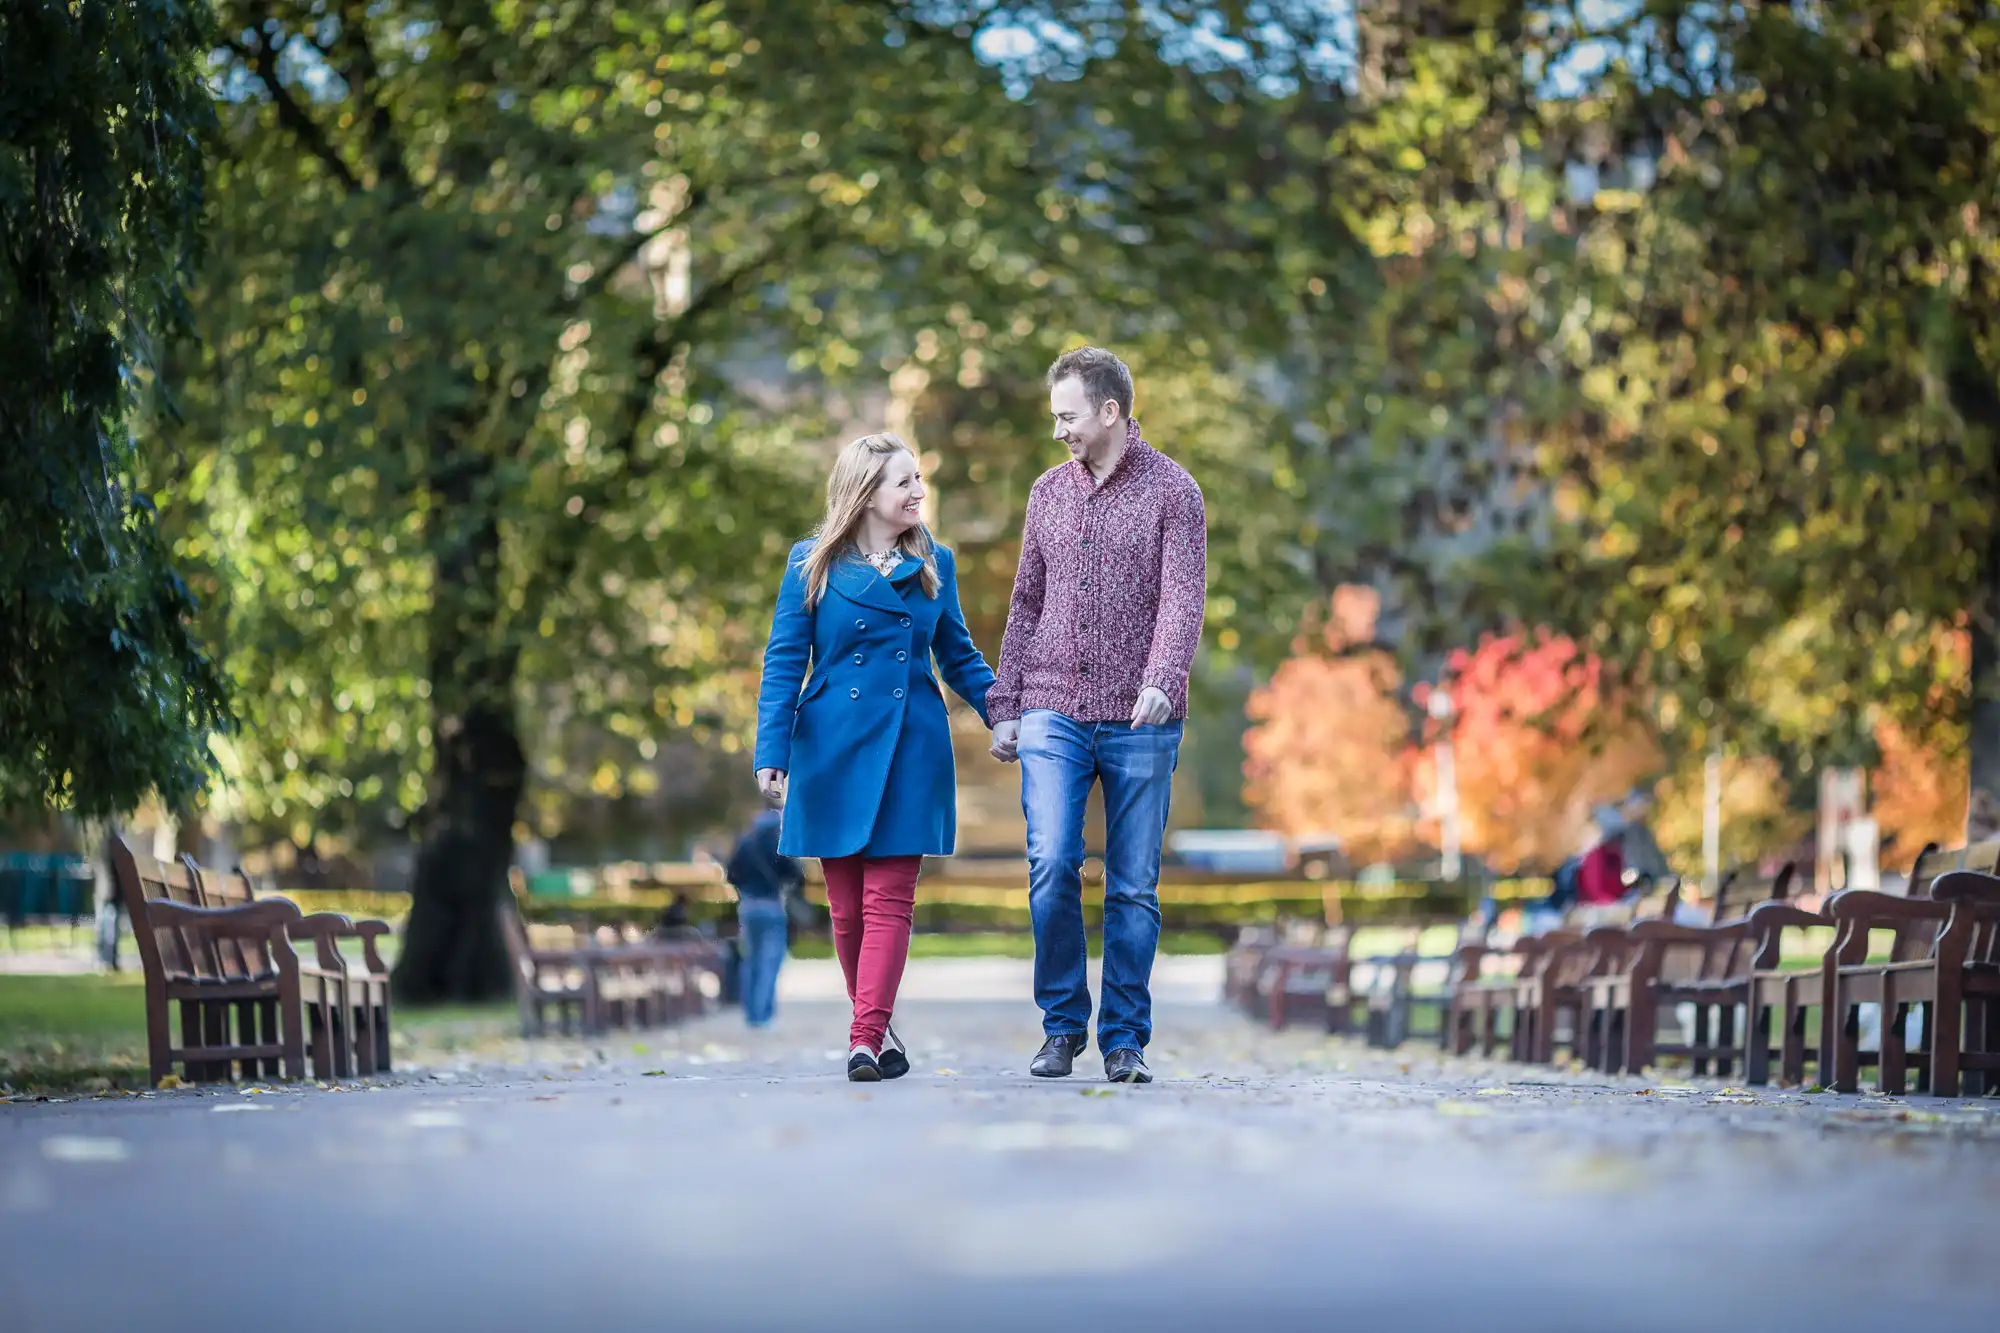 A couple walking hand in hand down a tree-lined pathway with fallen leaves and benches on either side, during autumn.